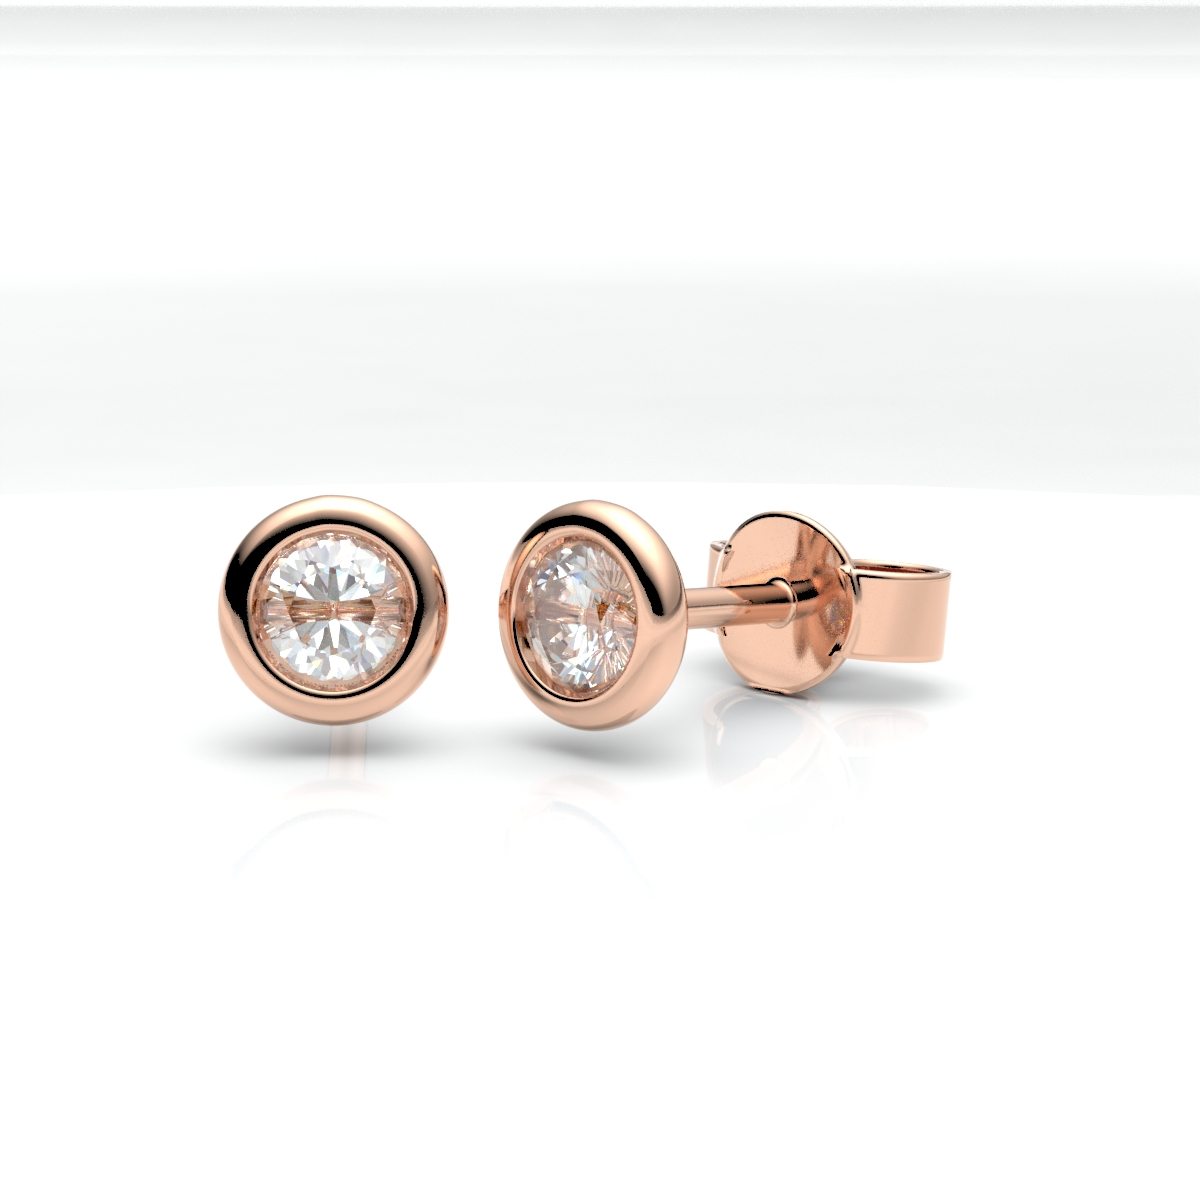 012504-5H34-001 | Ohrstecker Greven 012504 585 Roségold<br> Brillant 0,300 ct H-SI ∅ 3.4mm<br>100% Made in Germany  